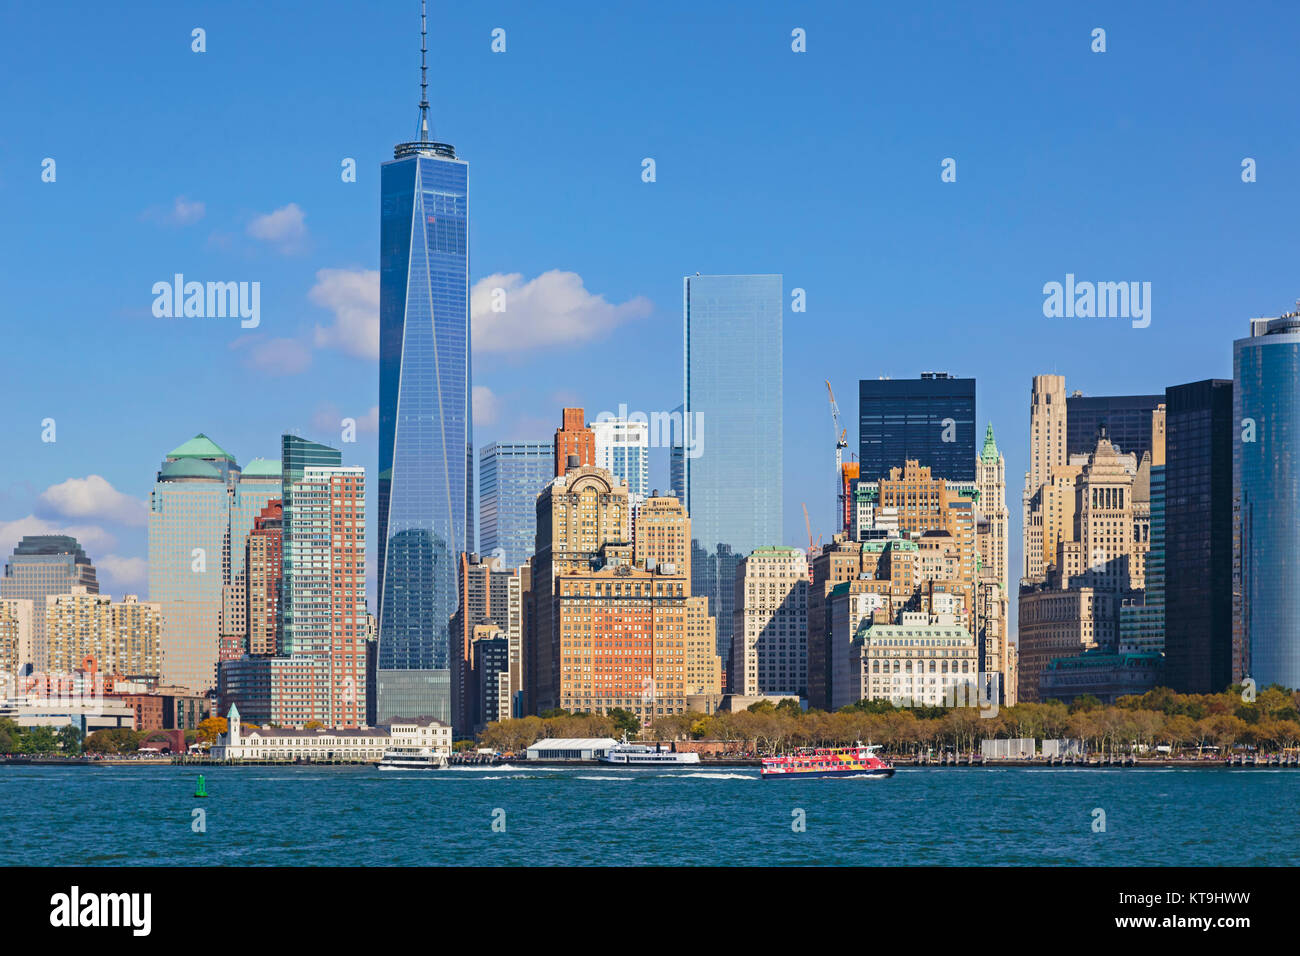 New York, New York State, United States of America.  Manhattan seen from New York Bay.  The tall building is One World Trade Center, also known as 1 W Stock Photo